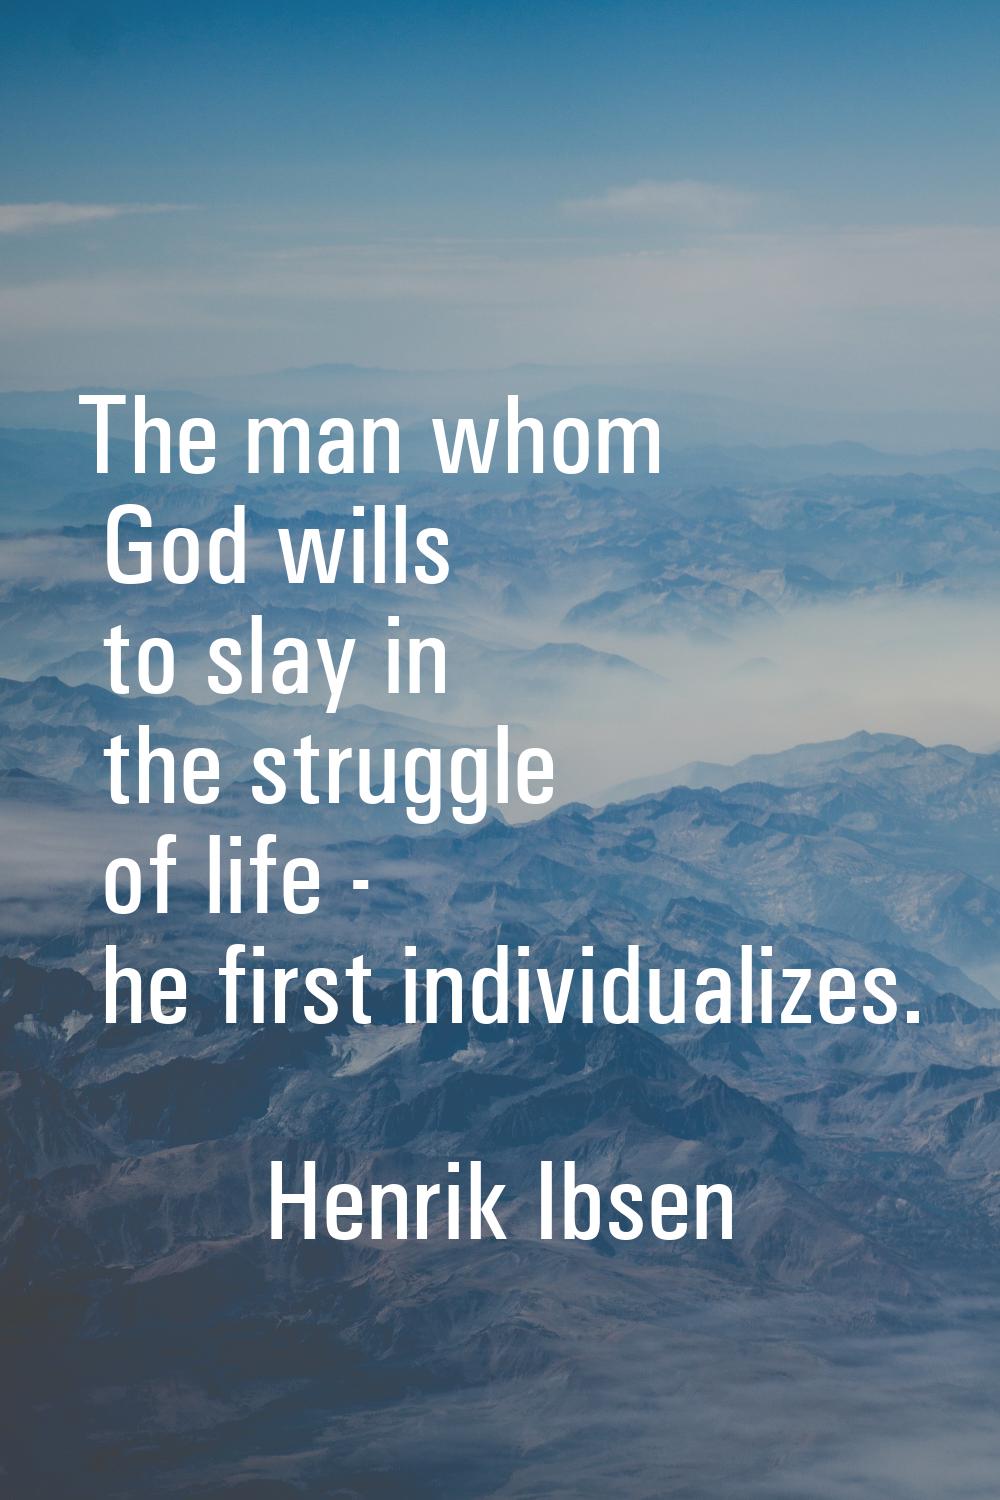 The man whom God wills to slay in the struggle of life - he first individualizes.